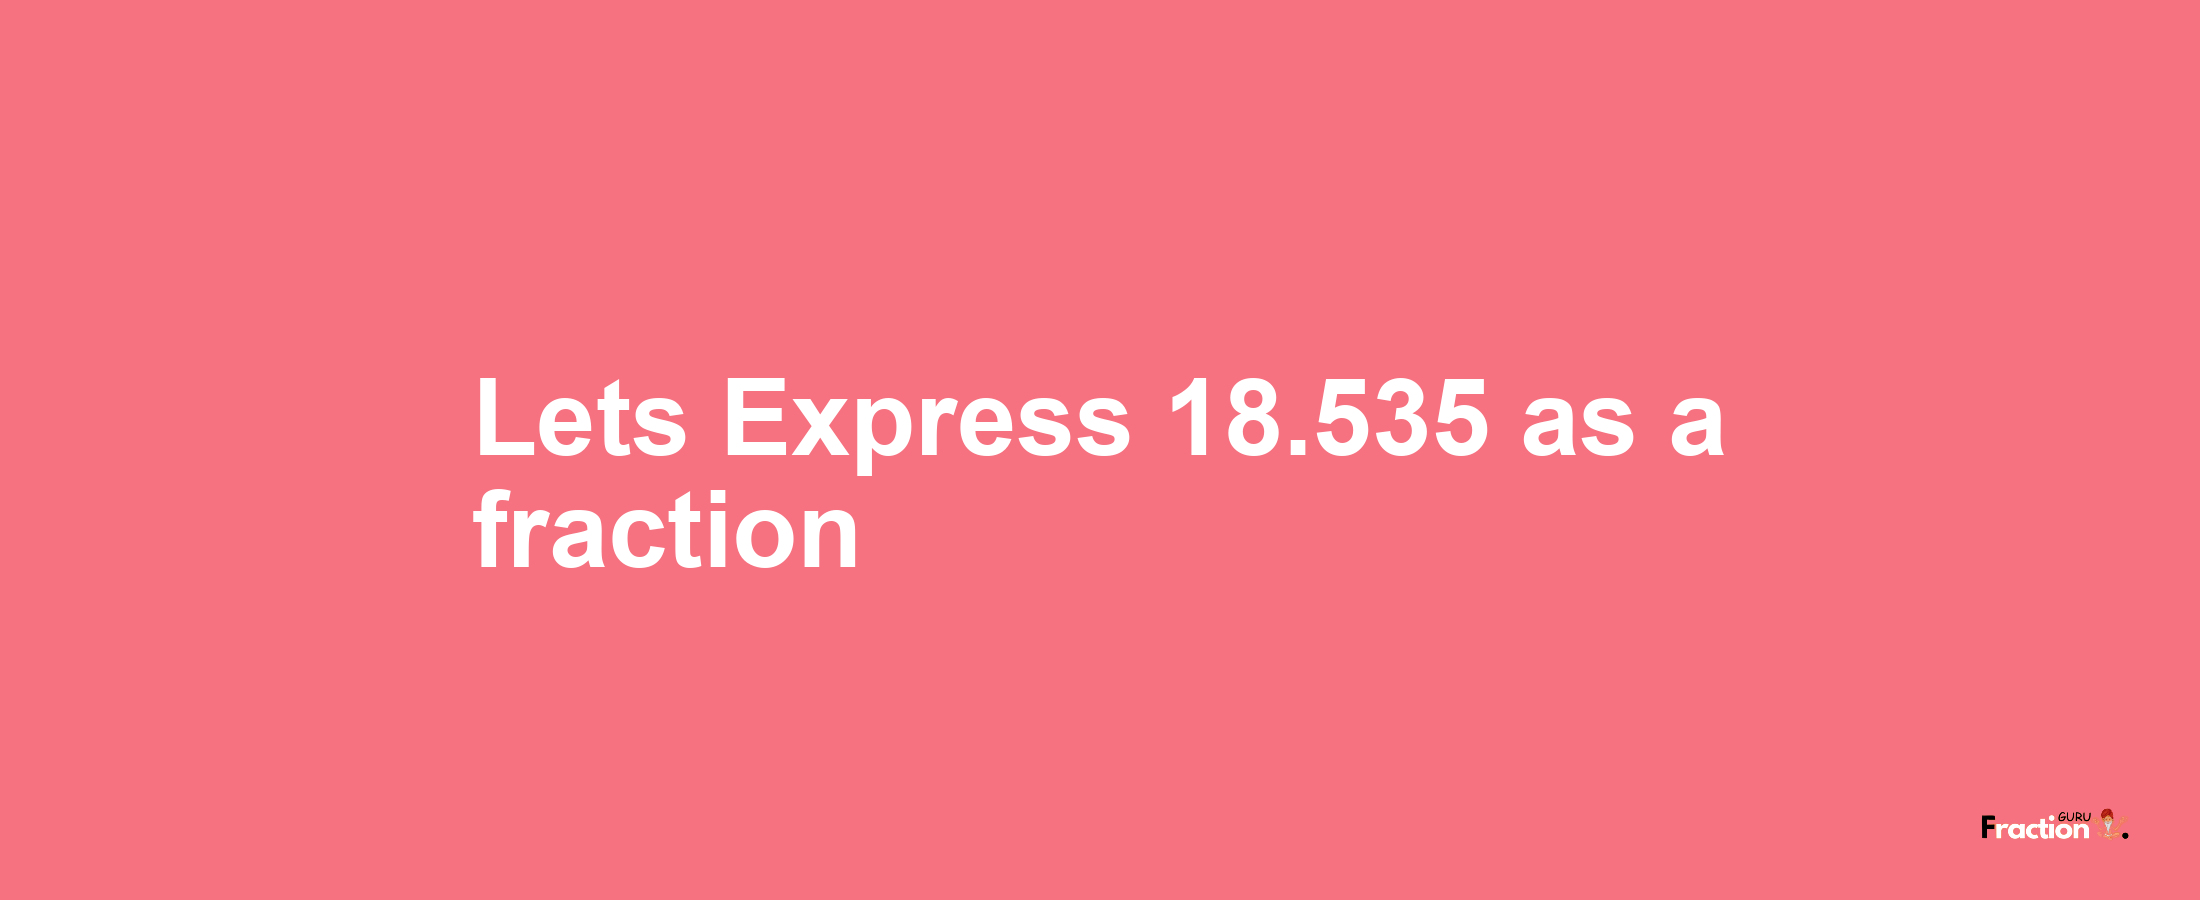 Lets Express 18.535 as afraction